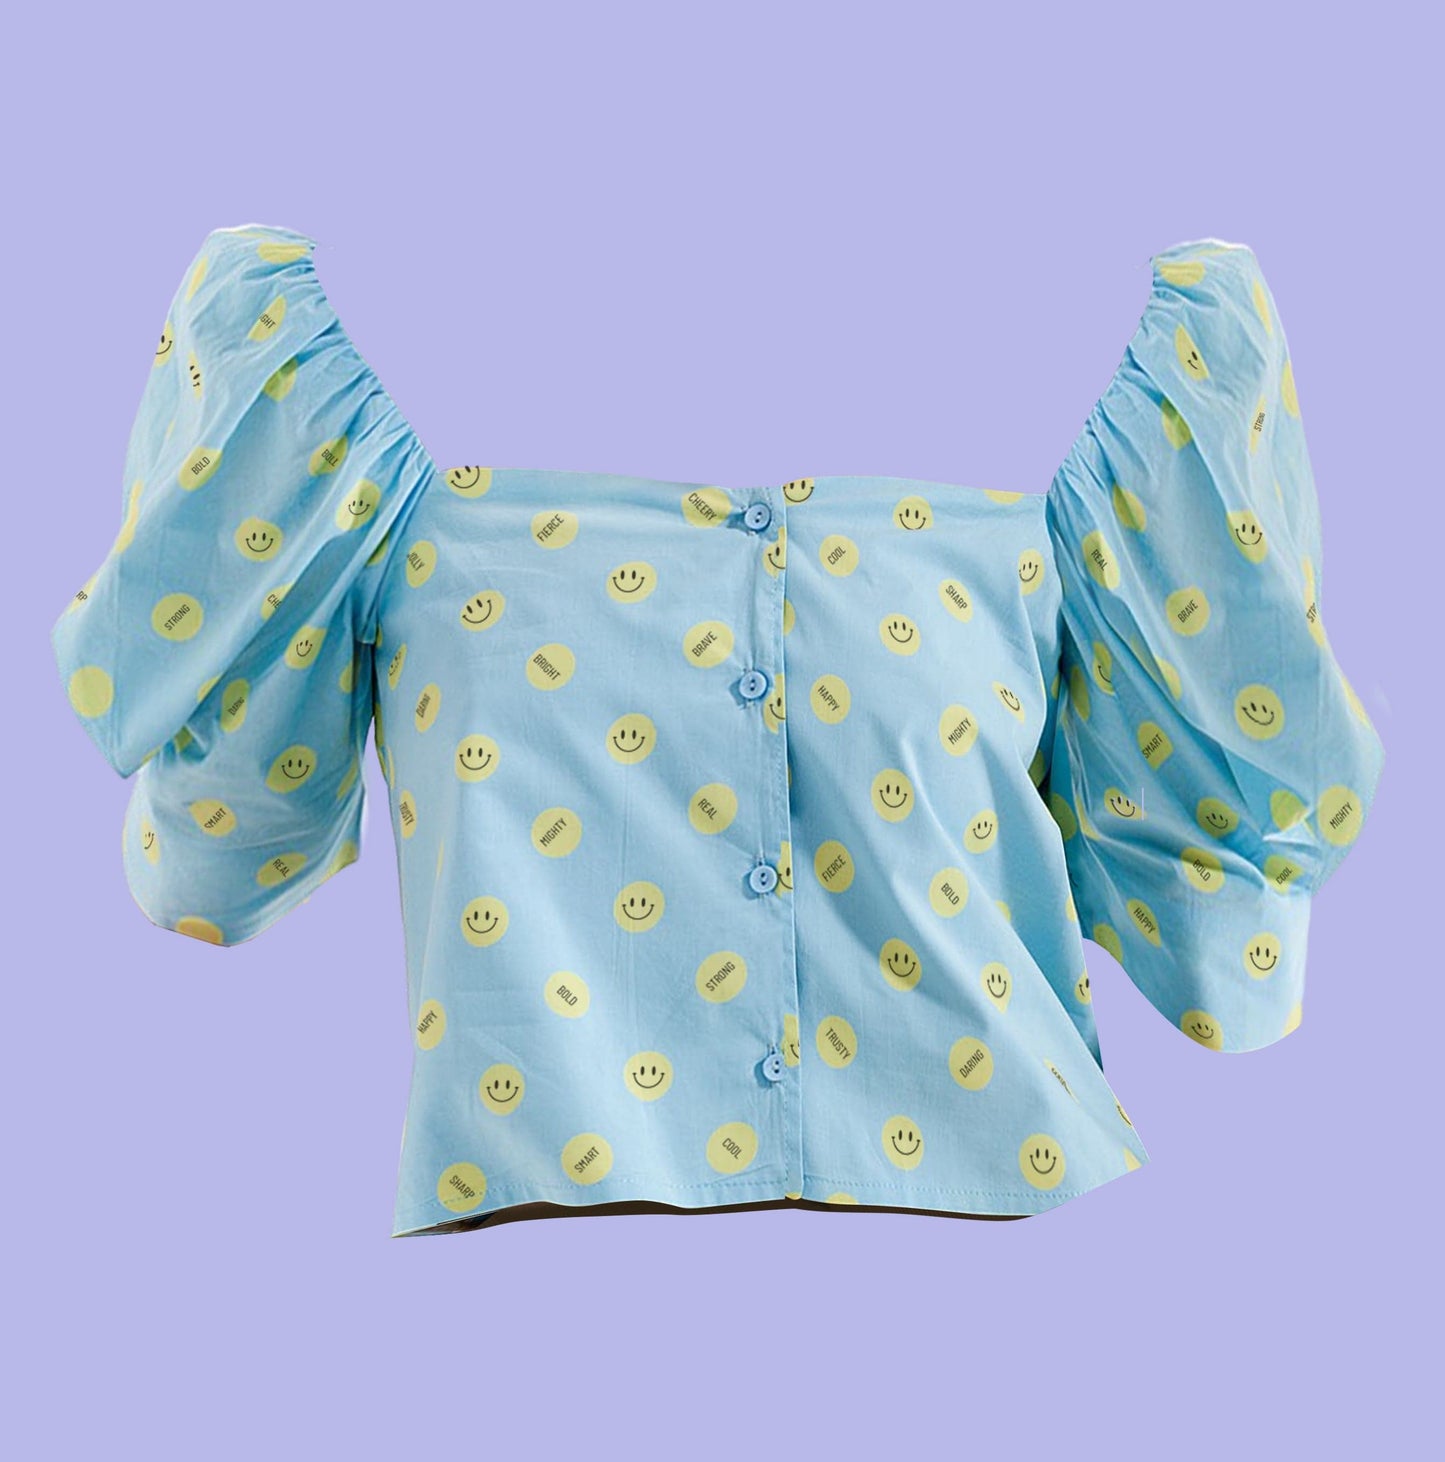 This is The Remix Top POSITIVE MINDSET - Smiley Faces and Puffed Sleeves with Squared Neckline Cropped Shirt in Light Blue